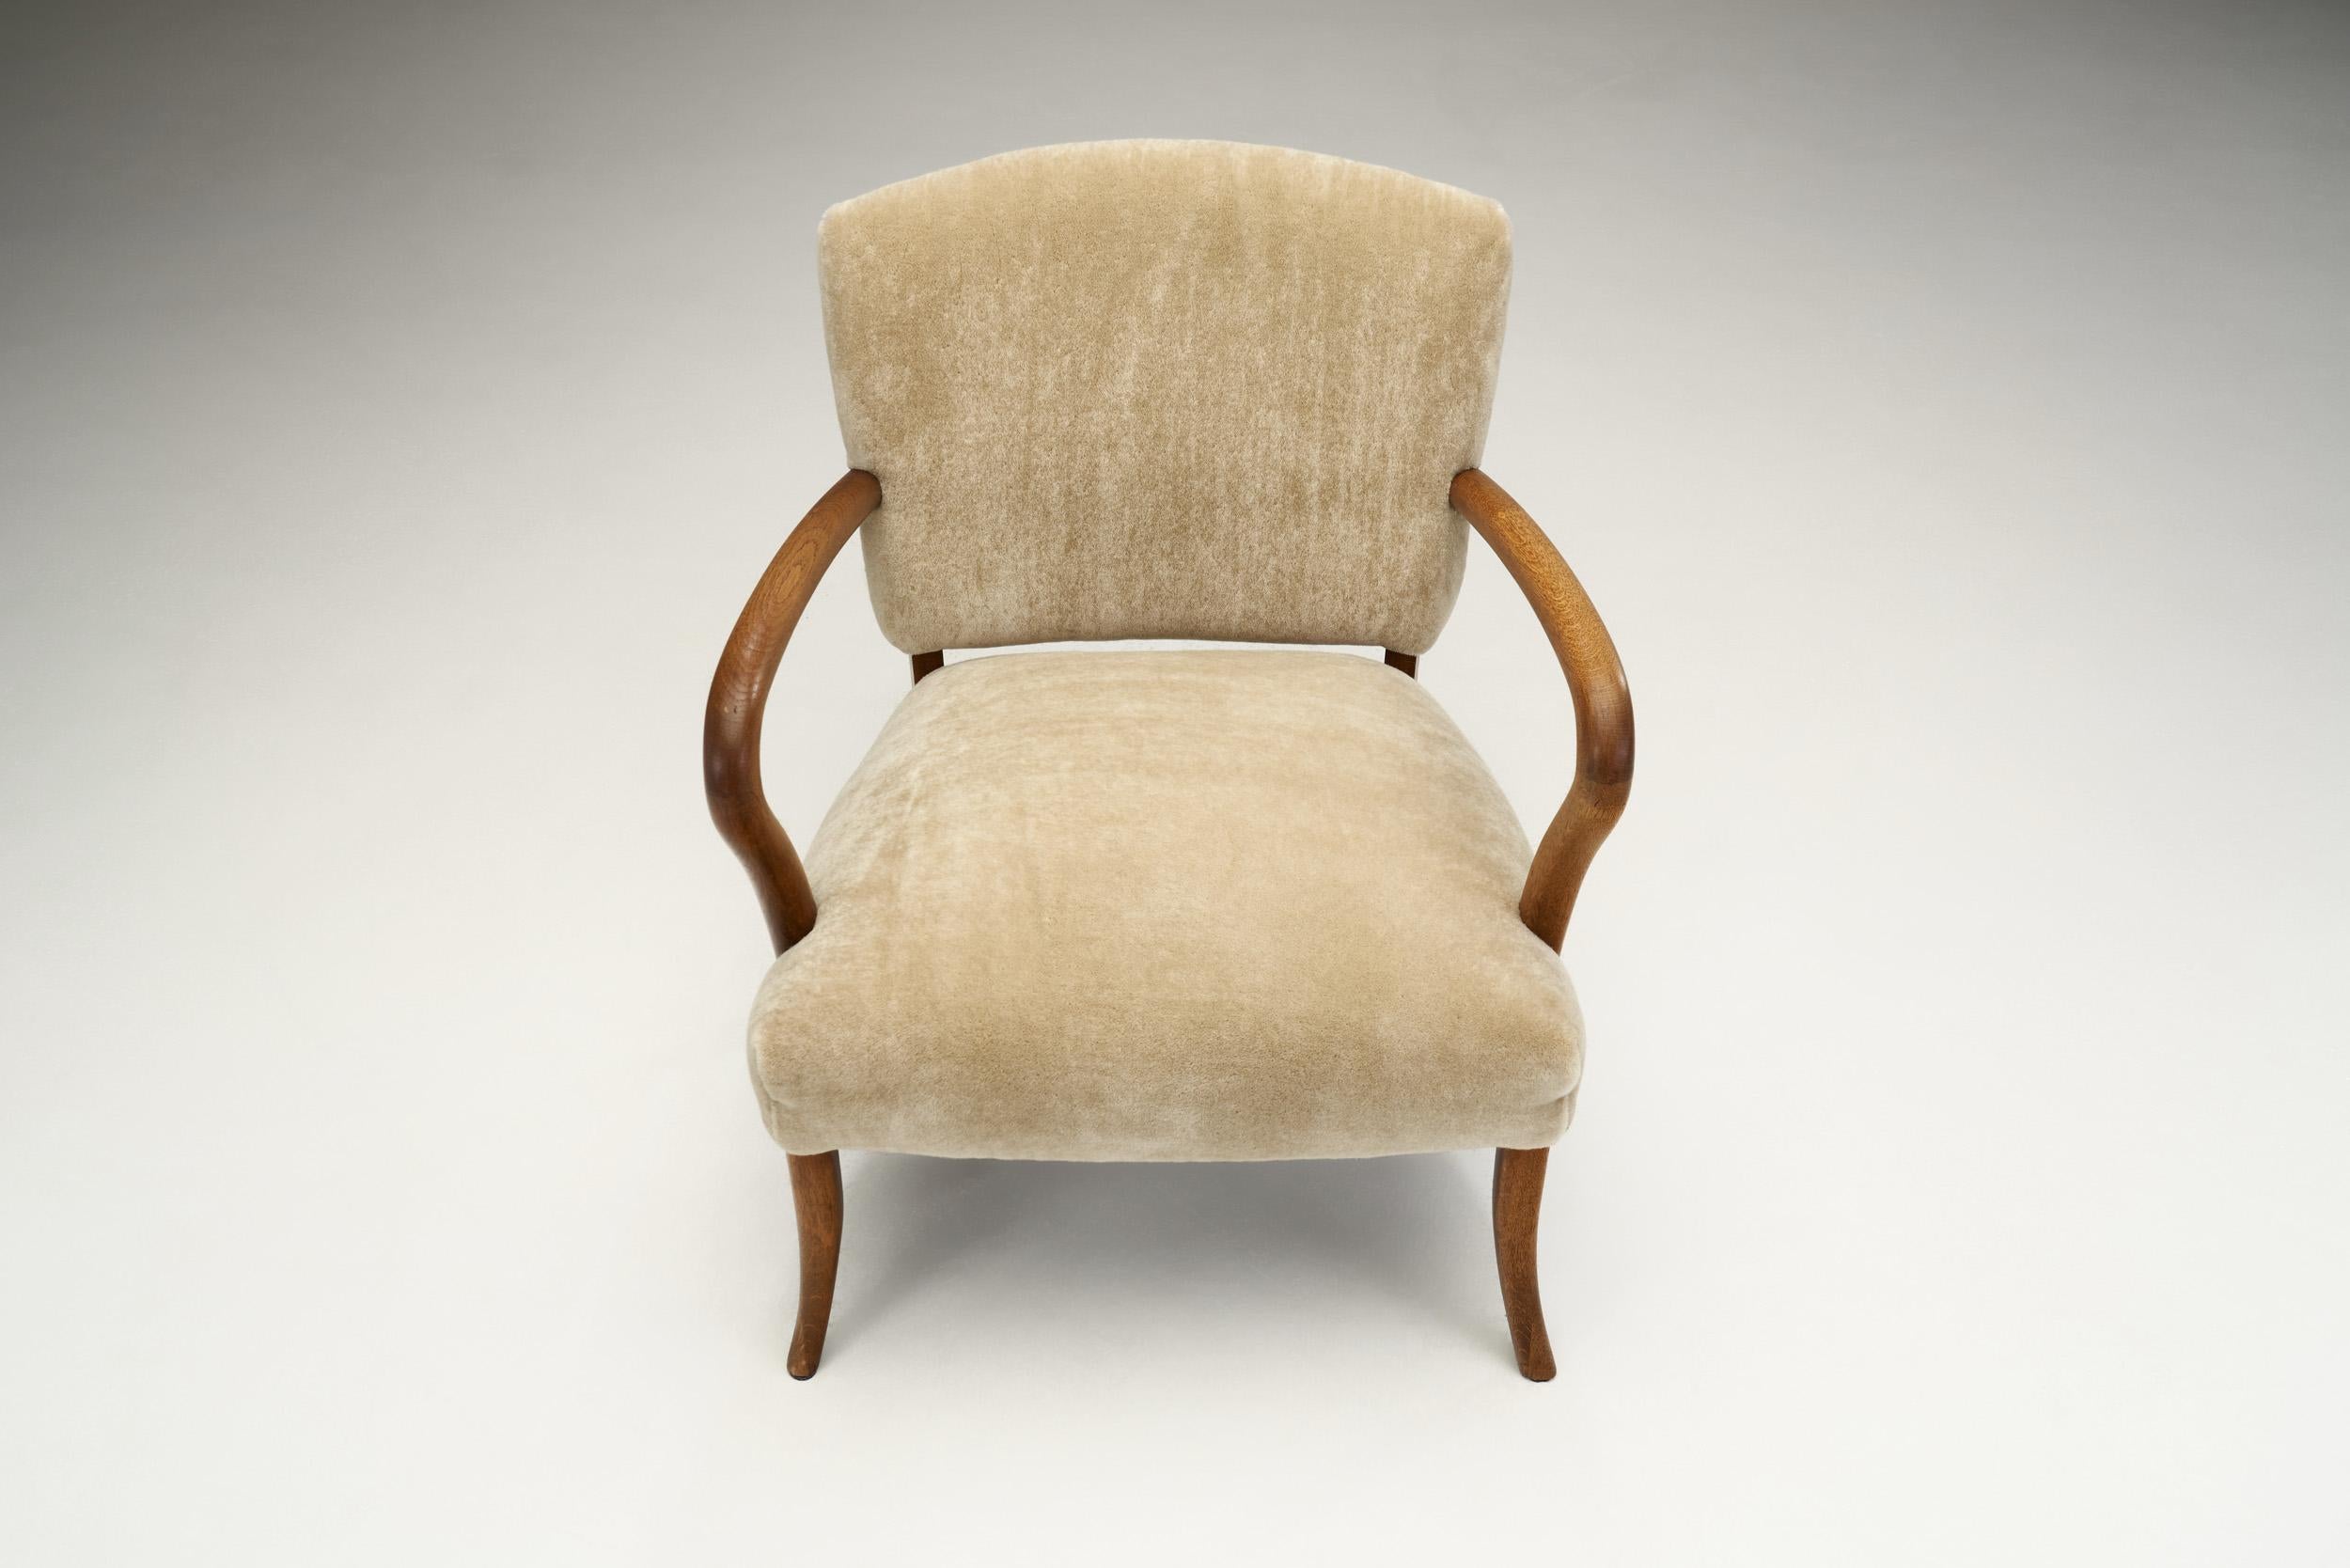 Sculptural Armchair with Curved Arms, Europe ca 1950s For Sale 2